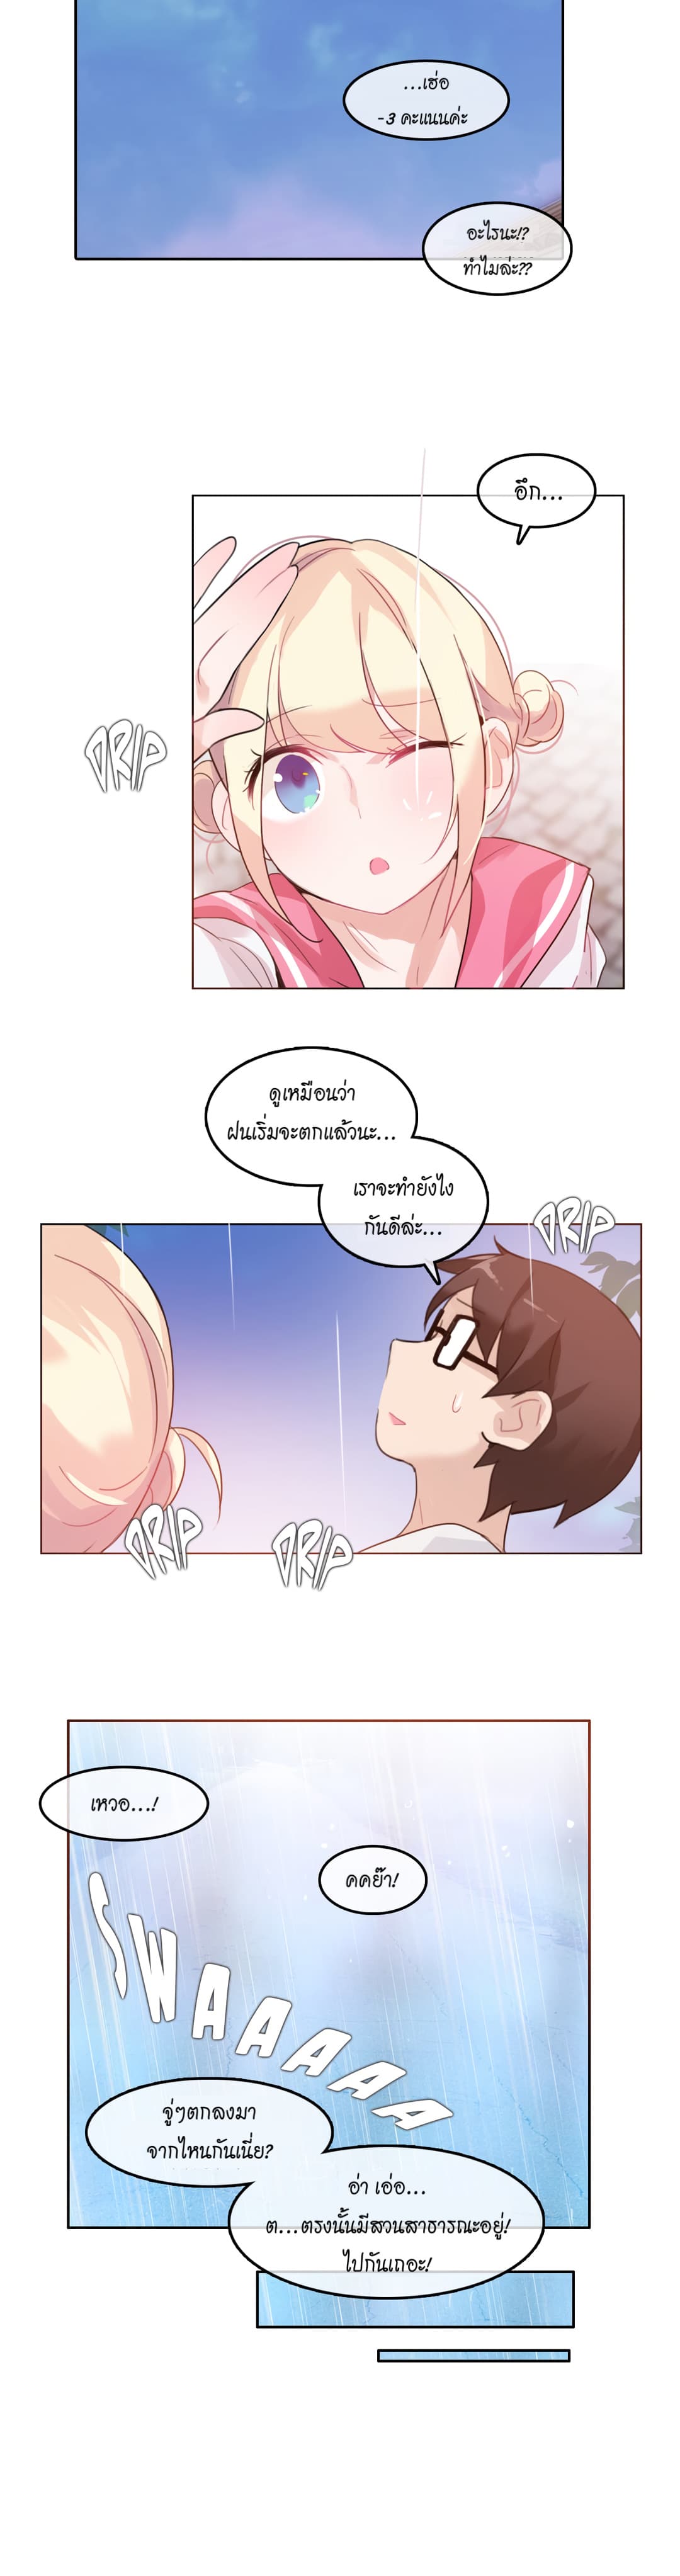 A Pervert’s Daily Life 29 (14)